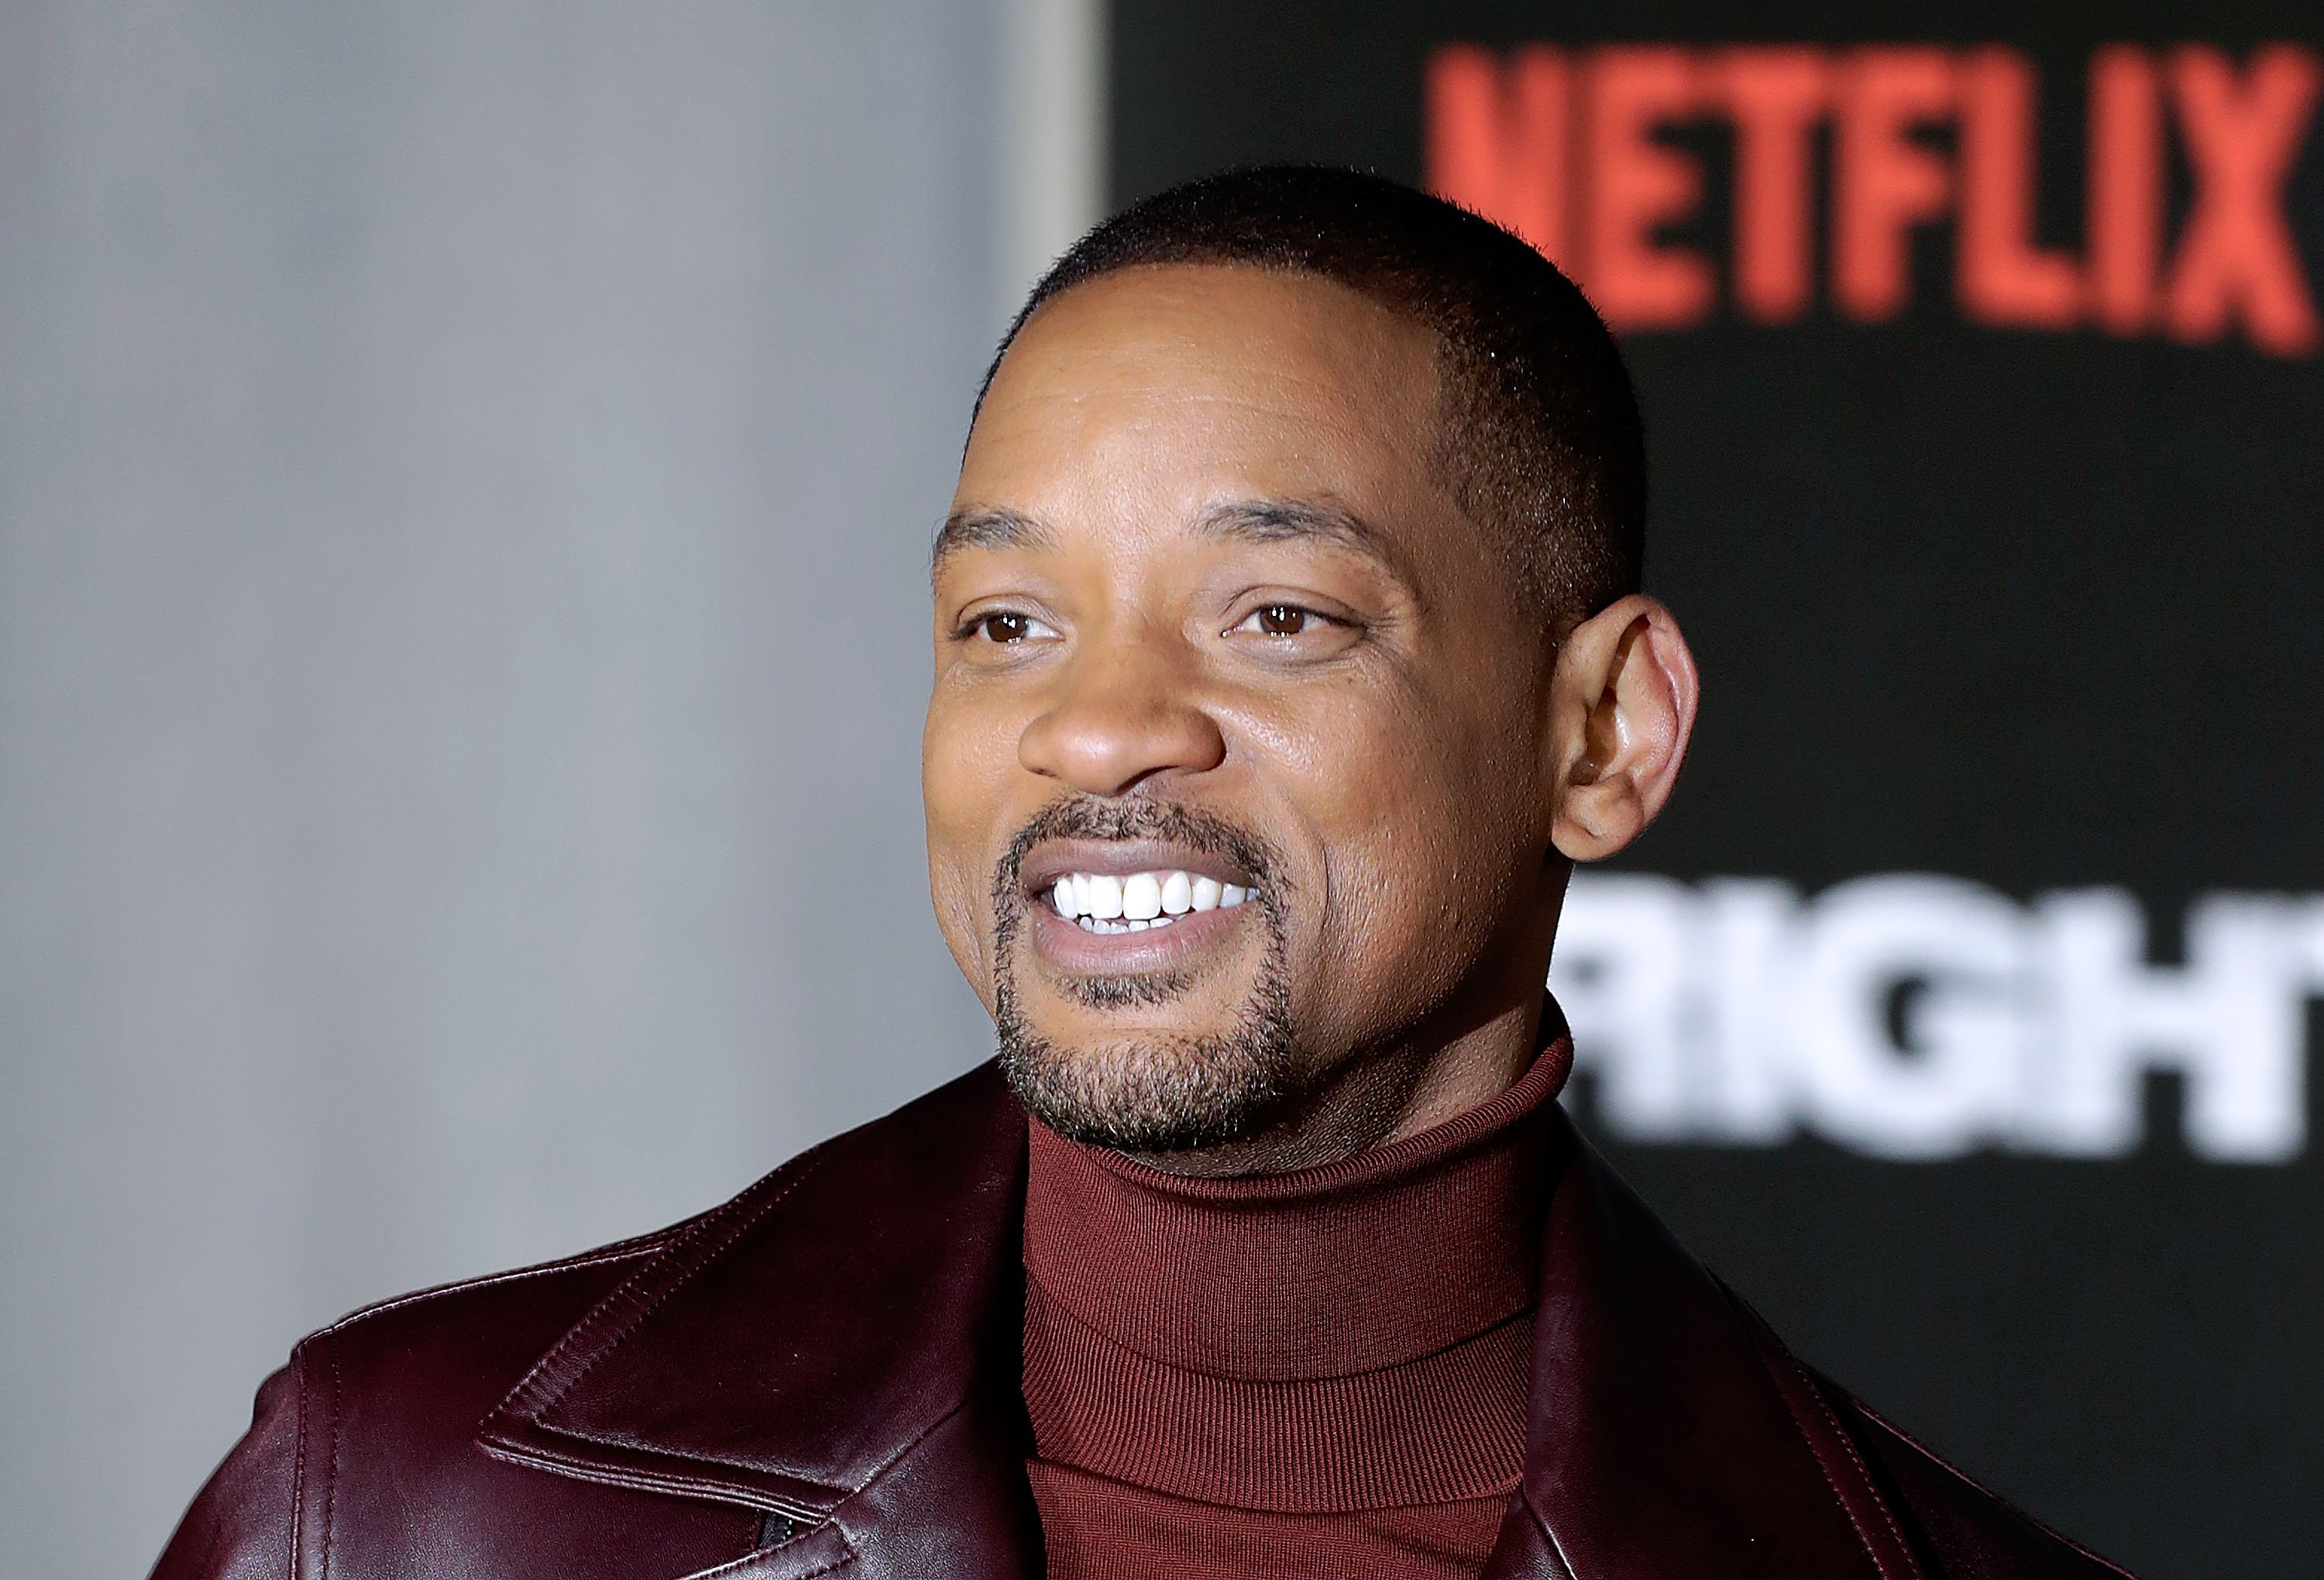 Will Smith attends the European Premeire of 'Bright' held at BFI Southbank on December 15, 2017 | Photo: GettyImages